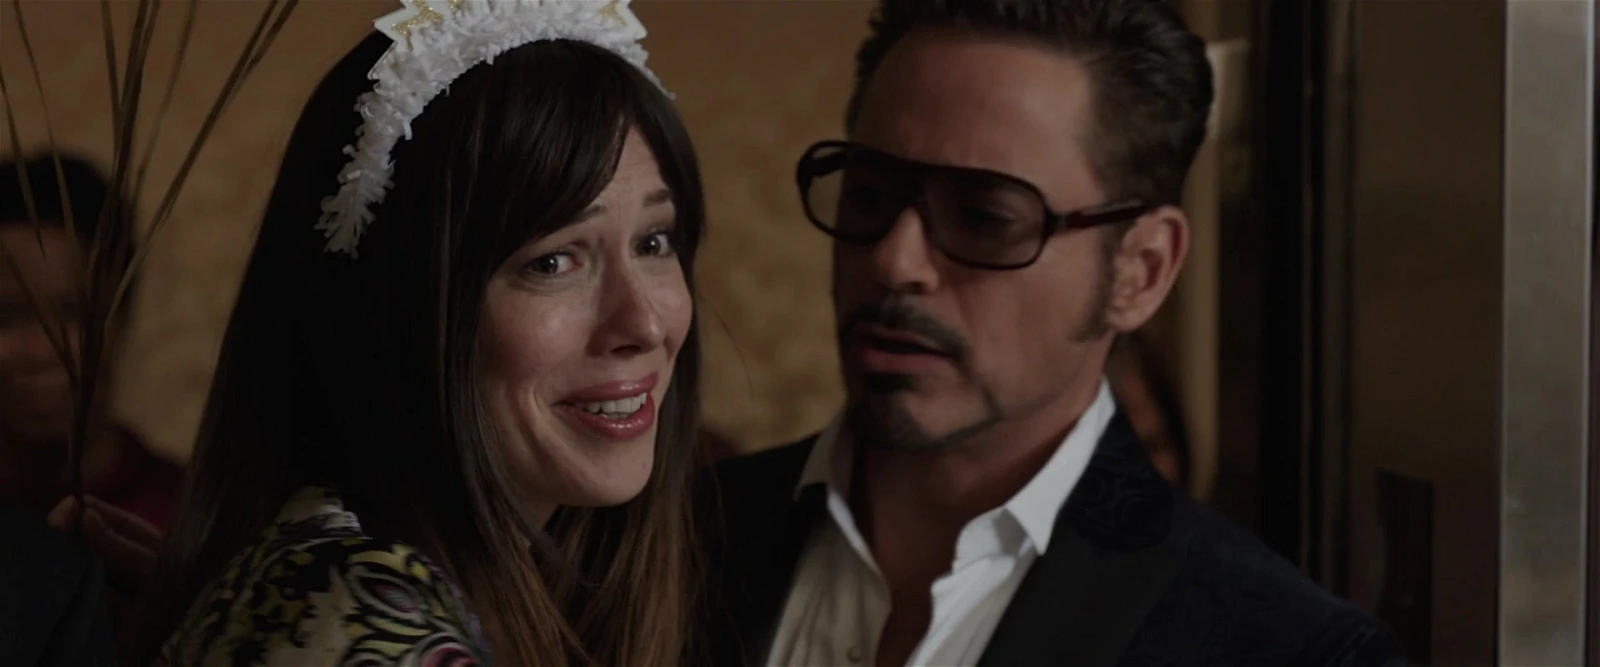 Rebecca Hall and Robert Downey Jr. in Iron Man 3